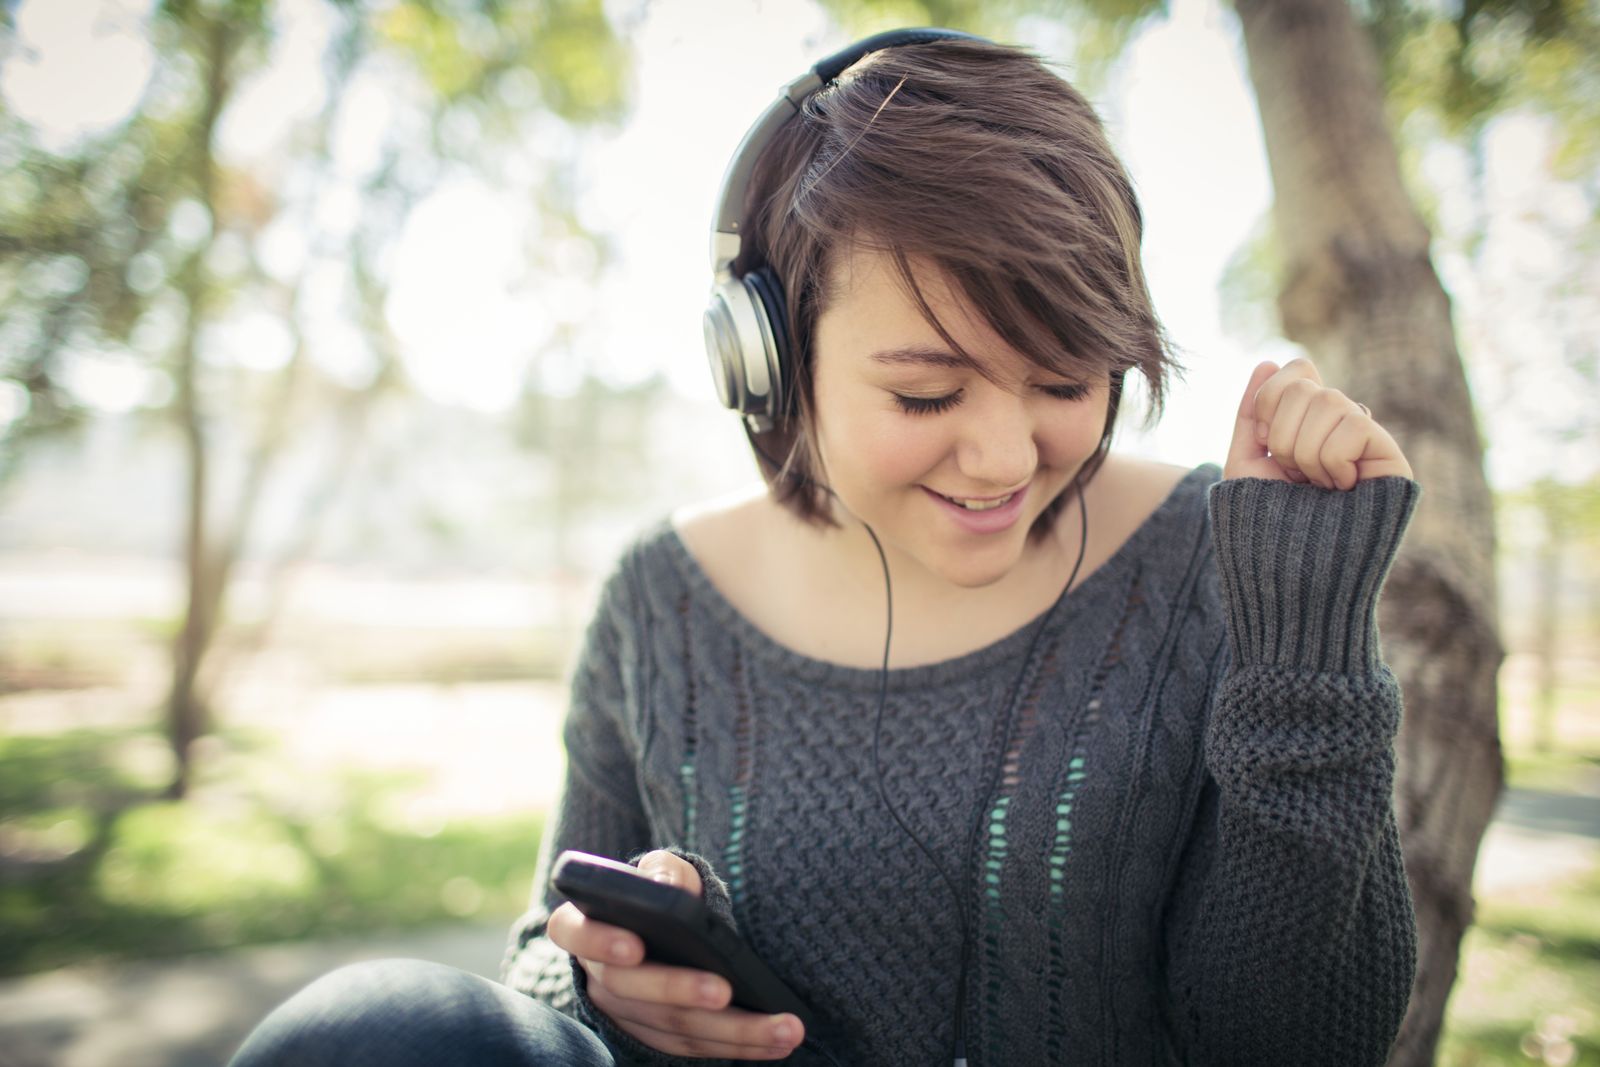 This Is Your Brain on Your Favorite Song | Smart News| Smithsonian Magazine